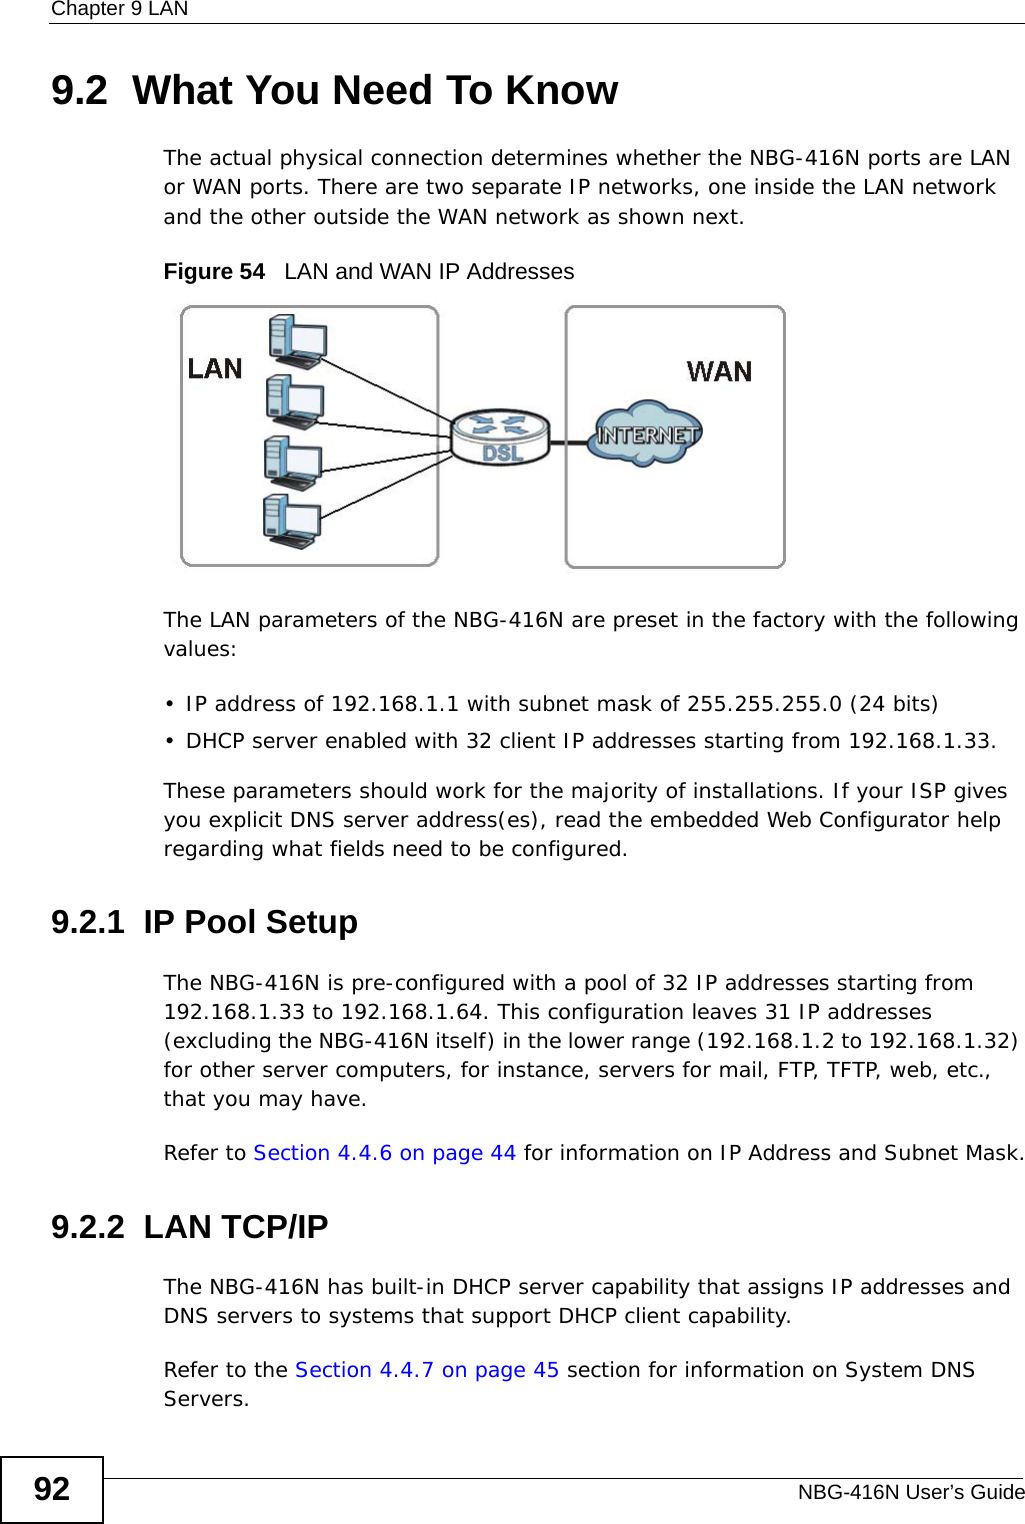 Chapter 9 LANNBG-416N User’s Guide929.2  What You Need To KnowThe actual physical connection determines whether the NBG-416N ports are LAN or WAN ports. There are two separate IP networks, one inside the LAN network and the other outside the WAN network as shown next.Figure 54   LAN and WAN IP AddressesThe LAN parameters of the NBG-416N are preset in the factory with the following values:• IP address of 192.168.1.1 with subnet mask of 255.255.255.0 (24 bits)• DHCP server enabled with 32 client IP addresses starting from 192.168.1.33. These parameters should work for the majority of installations. If your ISP gives you explicit DNS server address(es), read the embedded Web Configurator help regarding what fields need to be configured.9.2.1  IP Pool SetupThe NBG-416N is pre-configured with a pool of 32 IP addresses starting from 192.168.1.33 to 192.168.1.64. This configuration leaves 31 IP addresses (excluding the NBG-416N itself) in the lower range (192.168.1.2 to 192.168.1.32) for other server computers, for instance, servers for mail, FTP, TFTP, web, etc., that you may have.Refer to Section 4.4.6 on page 44 for information on IP Address and Subnet Mask.9.2.2  LAN TCP/IP The NBG-416N has built-in DHCP server capability that assigns IP addresses and DNS servers to systems that support DHCP client capability.Refer to the Section 4.4.7 on page 45 section for information on System DNS Servers.